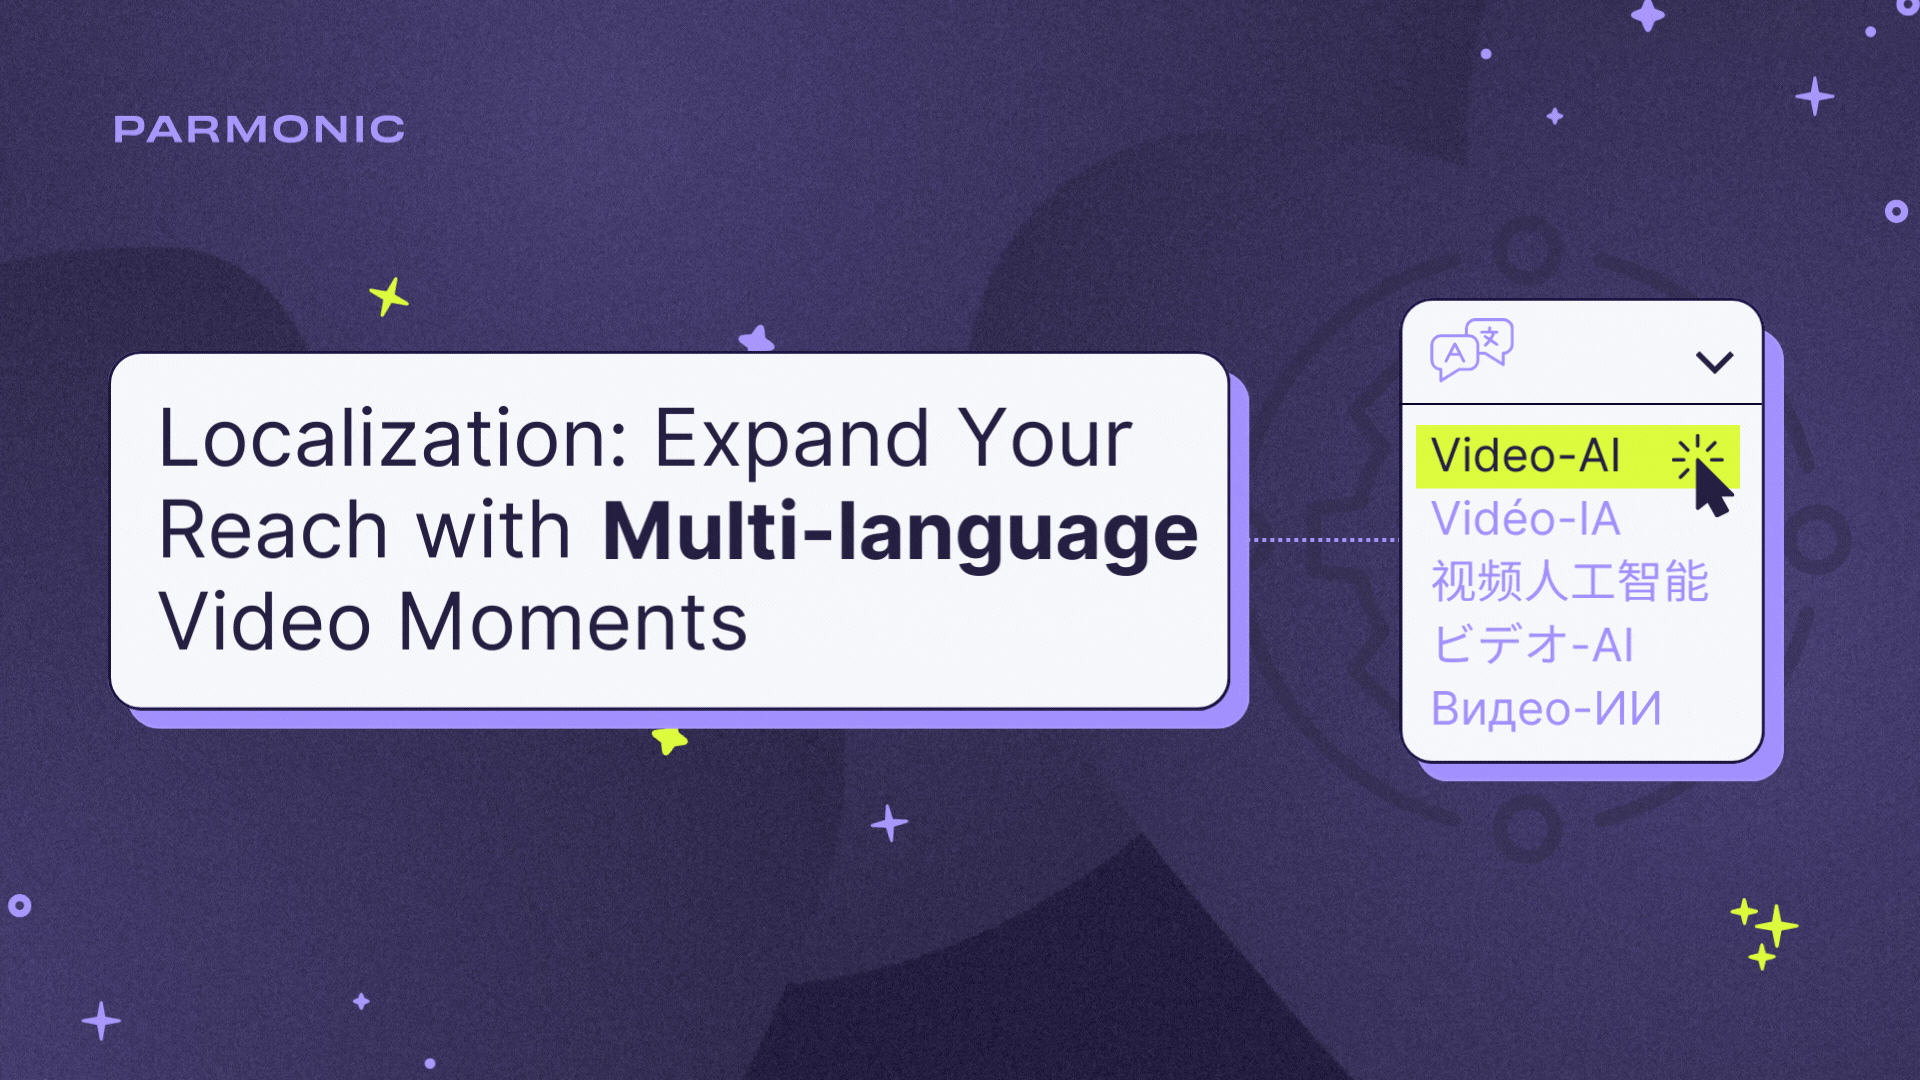 Localization: Expand Your Reach with Multi-language Video Moments